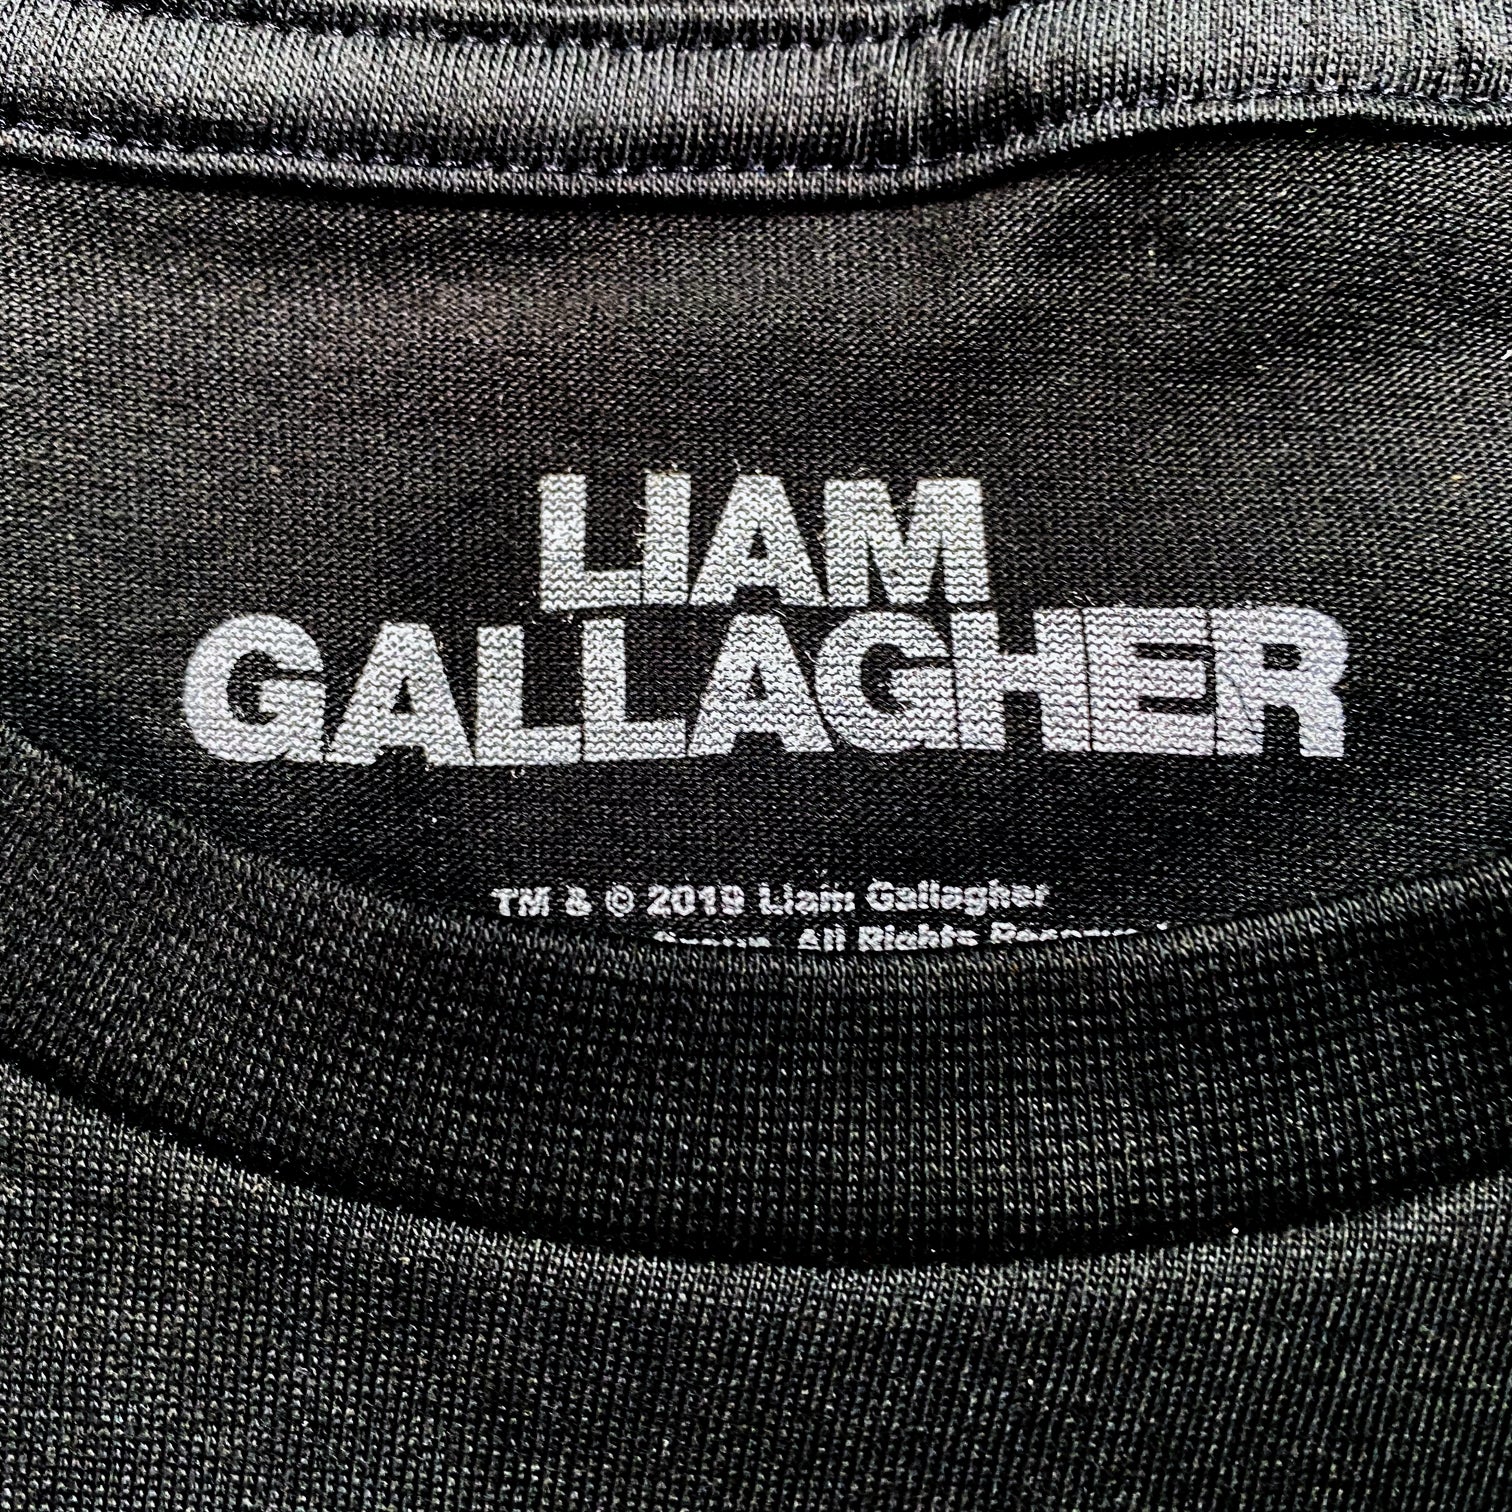 Liam Gallagher - 'As You Were' T Shirt - End Of Line